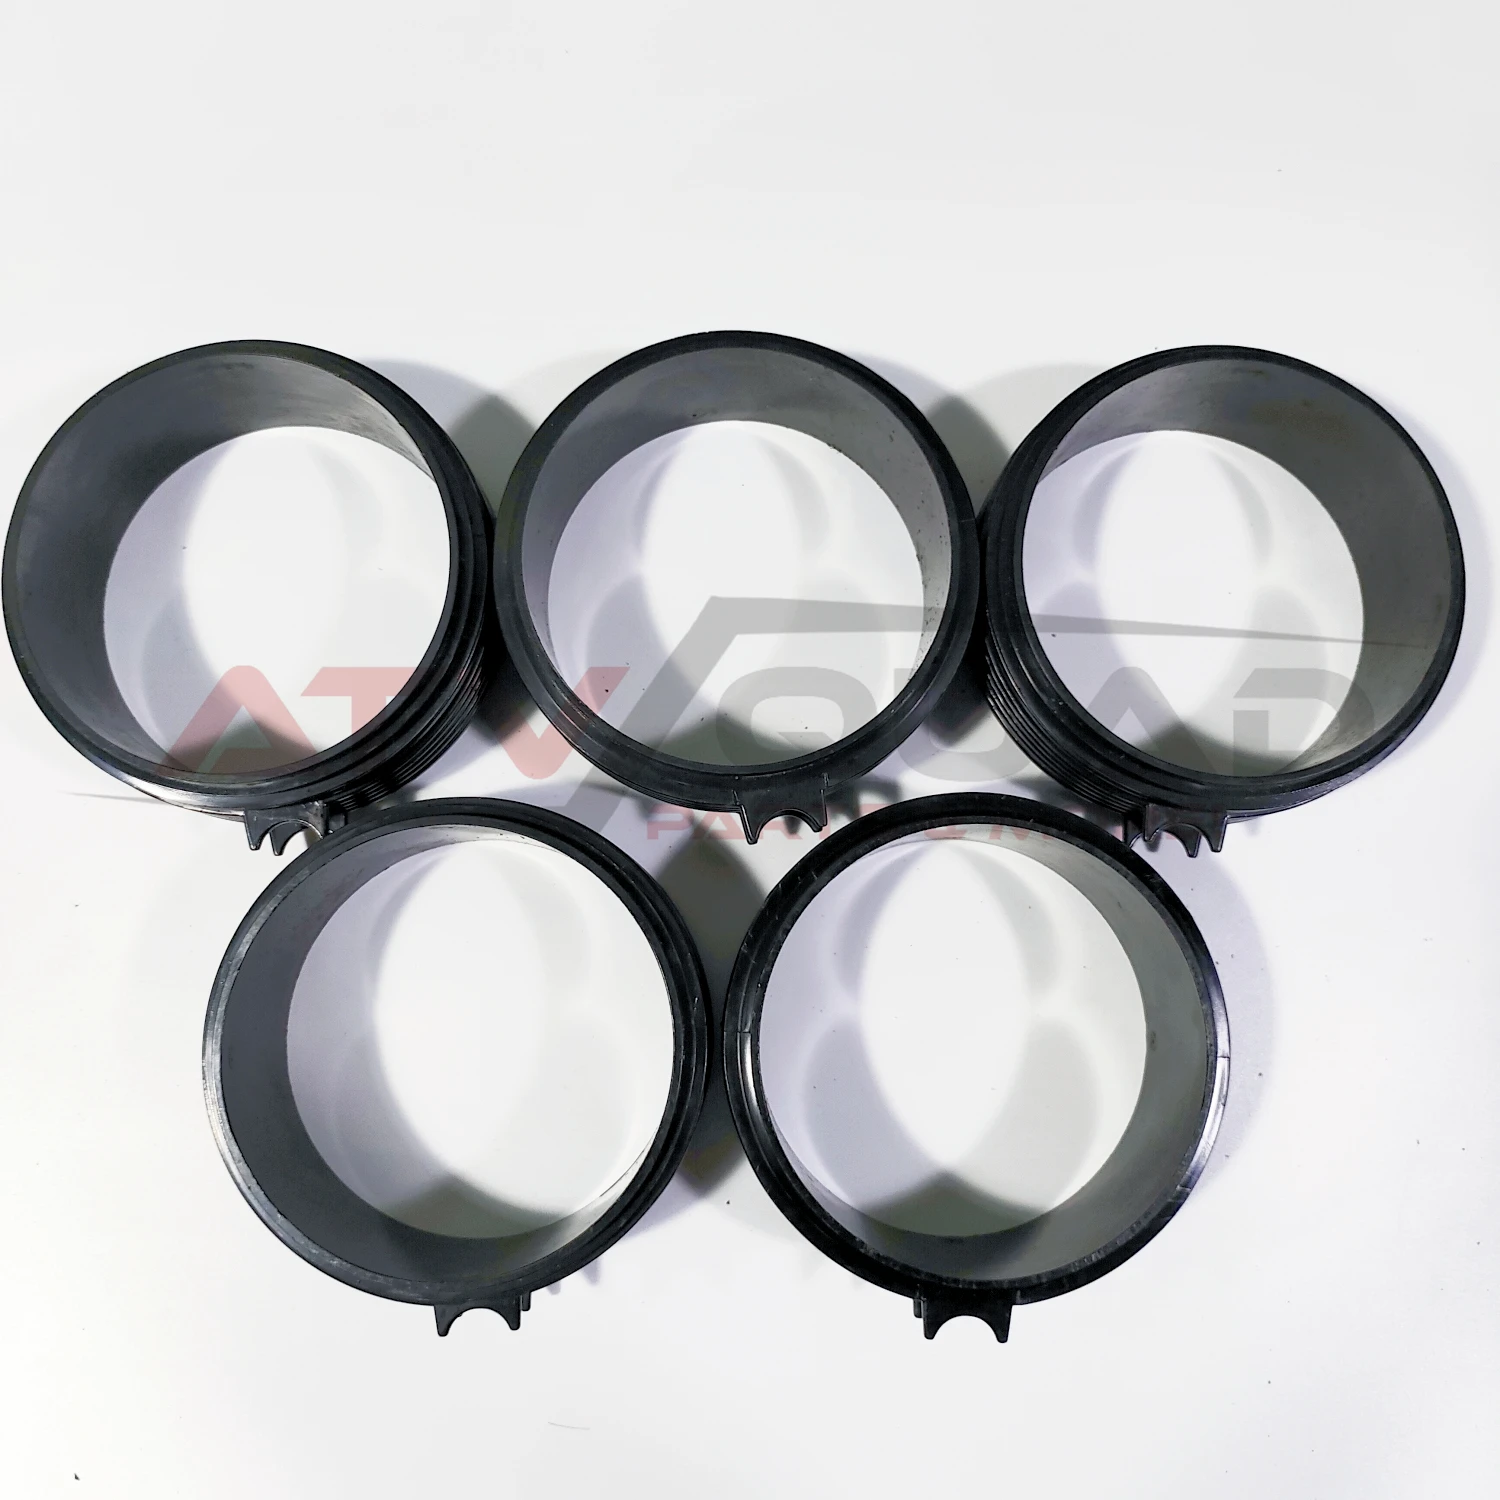 5PCS 140MM Wear Ring for Sea-Doo BRP Spark 60 90 2UP 3UP 900 HO ACE TRIXX IBR 267000813 267000883 267000925